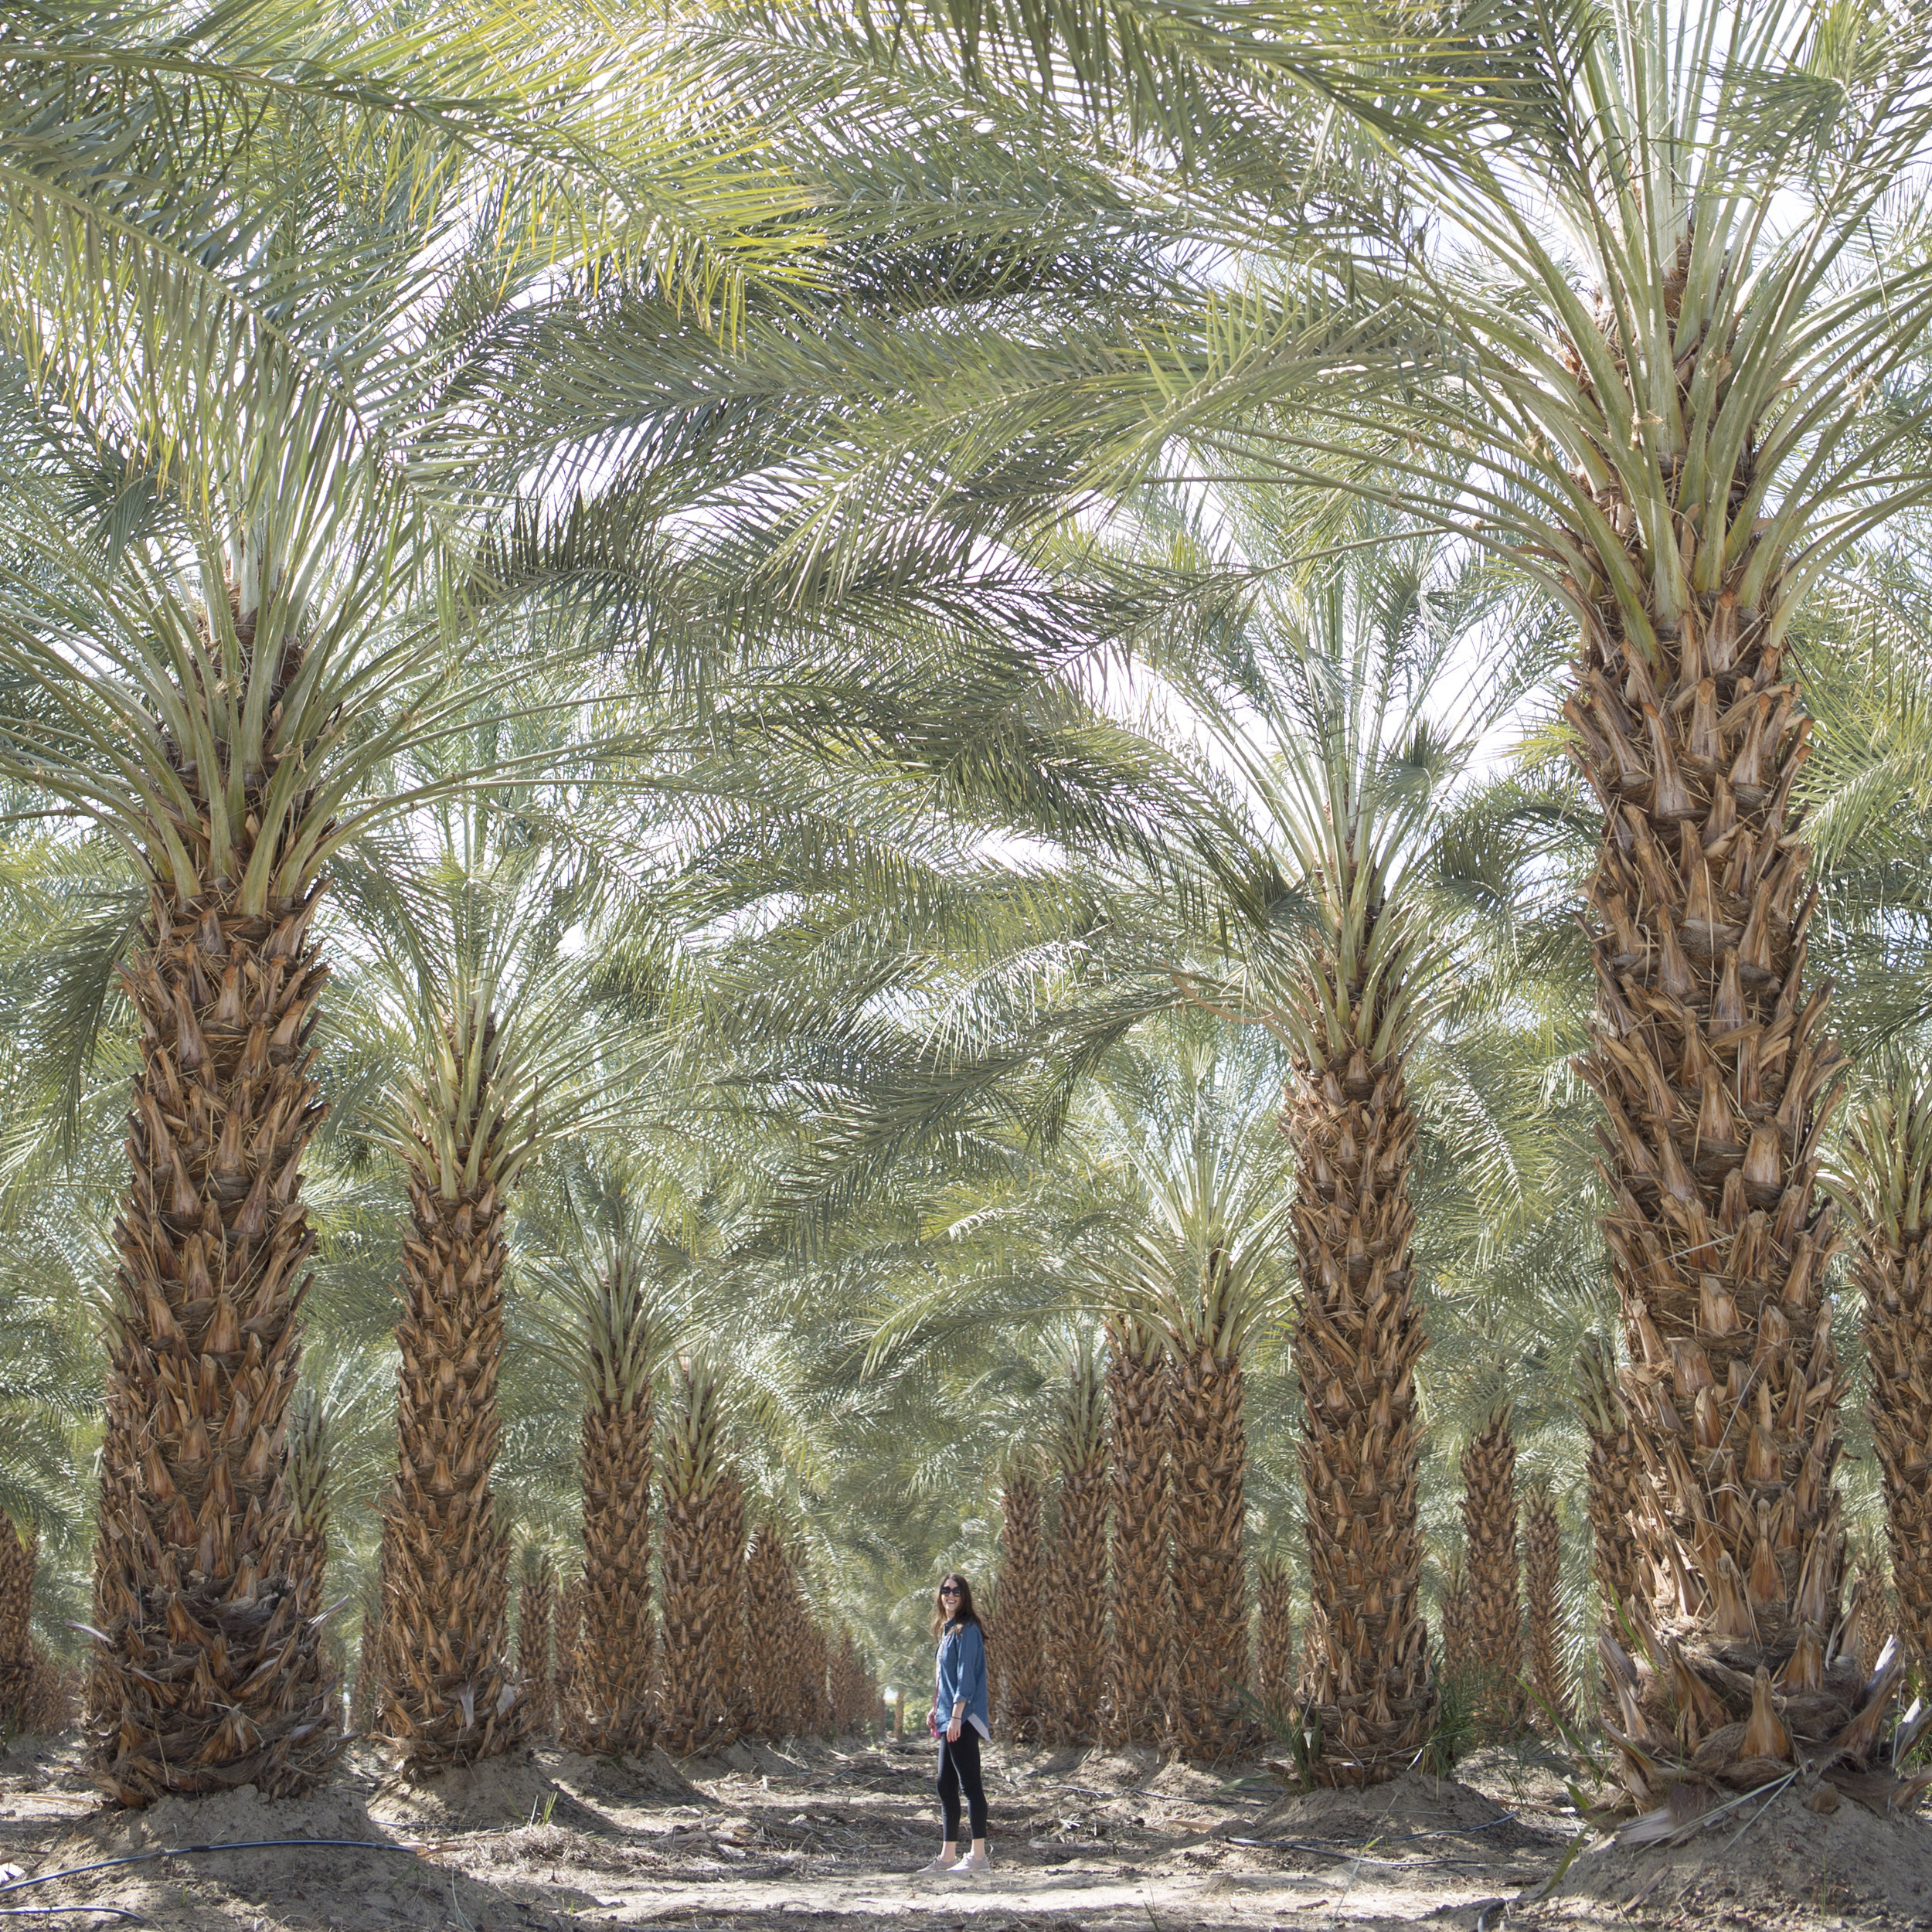  This palm tree farm was my fav! I've never seen anything so vast and magnificent. image by @lizzie_darden 